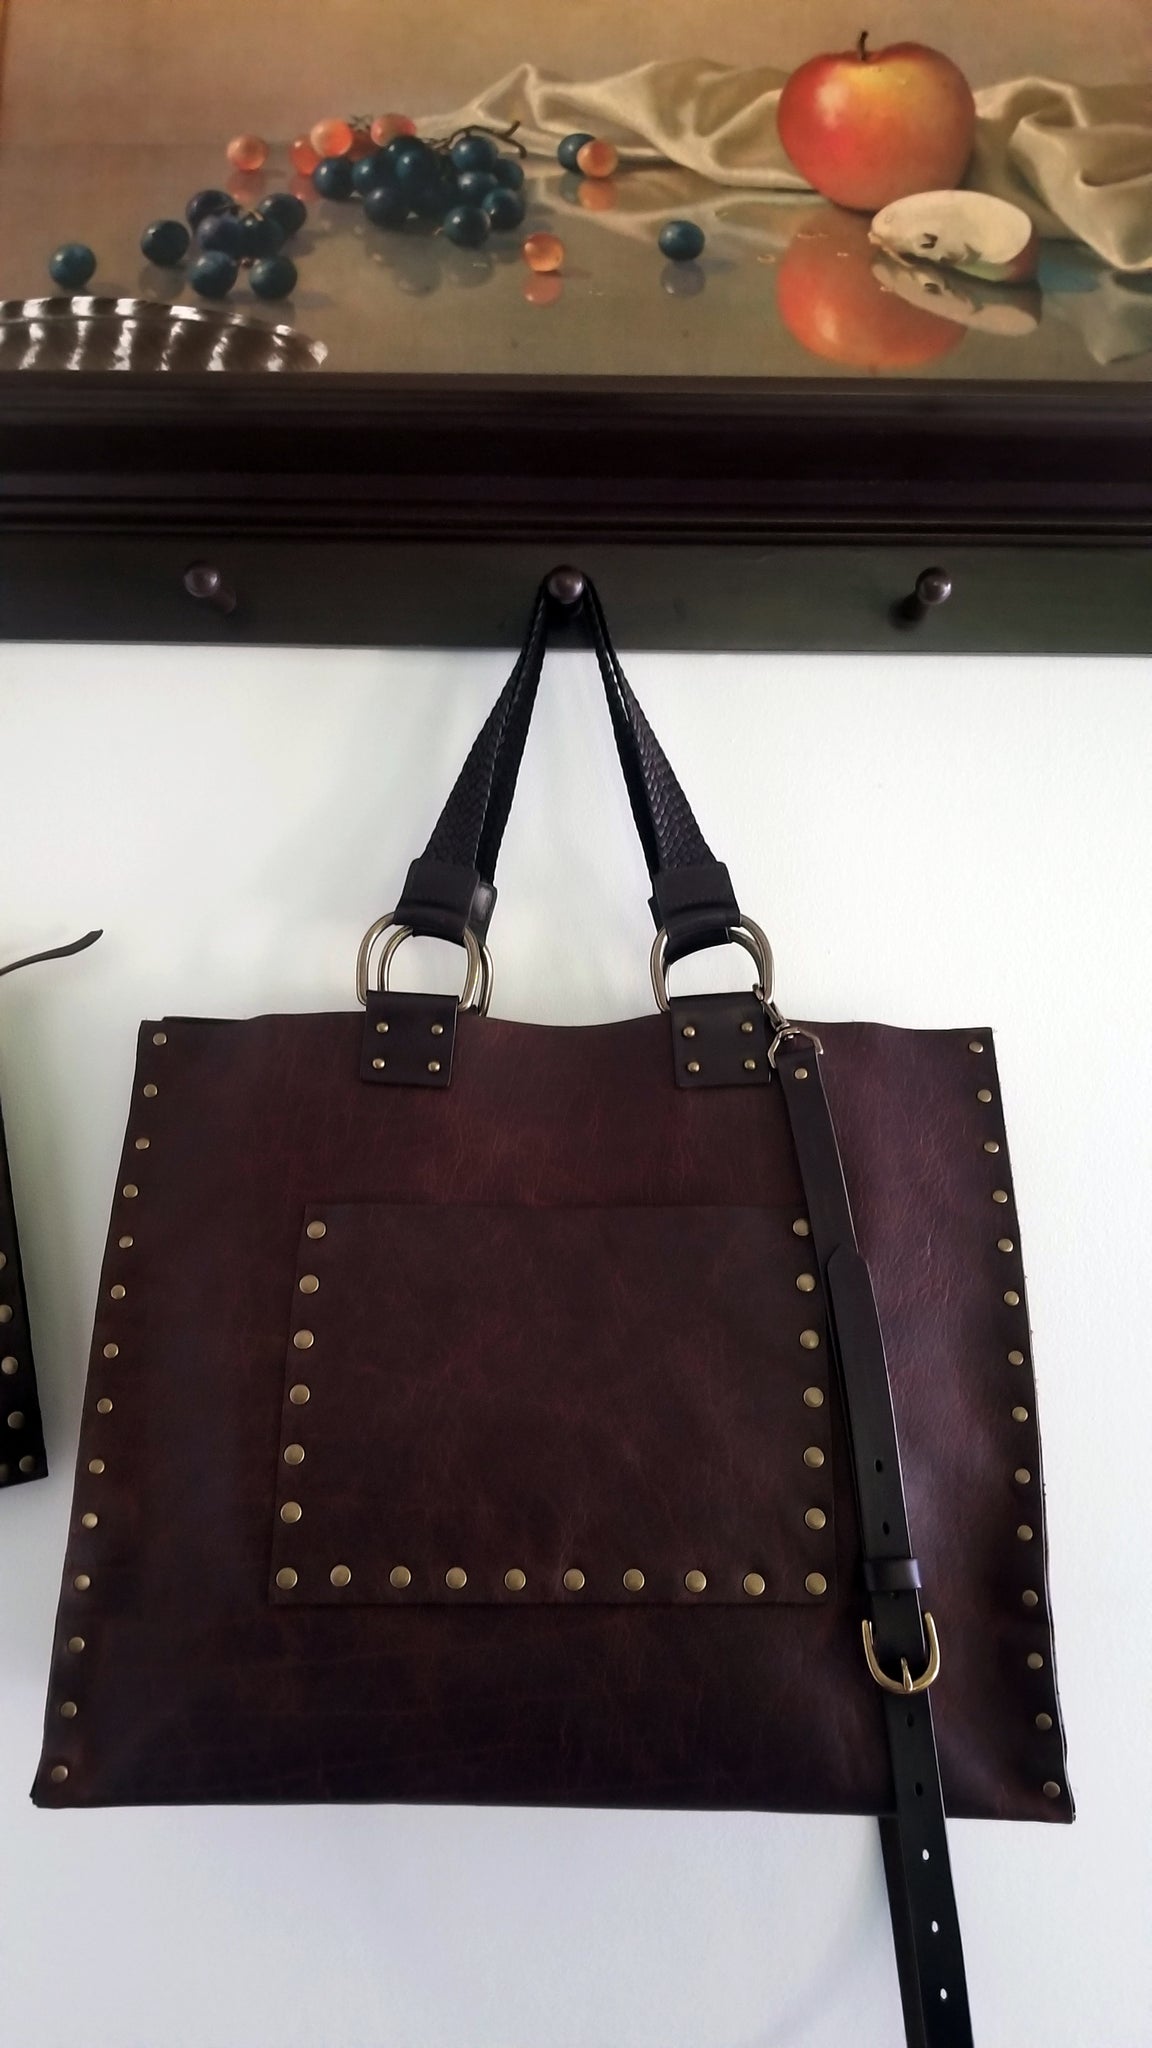 malia tote bag, brown with matching carry strap